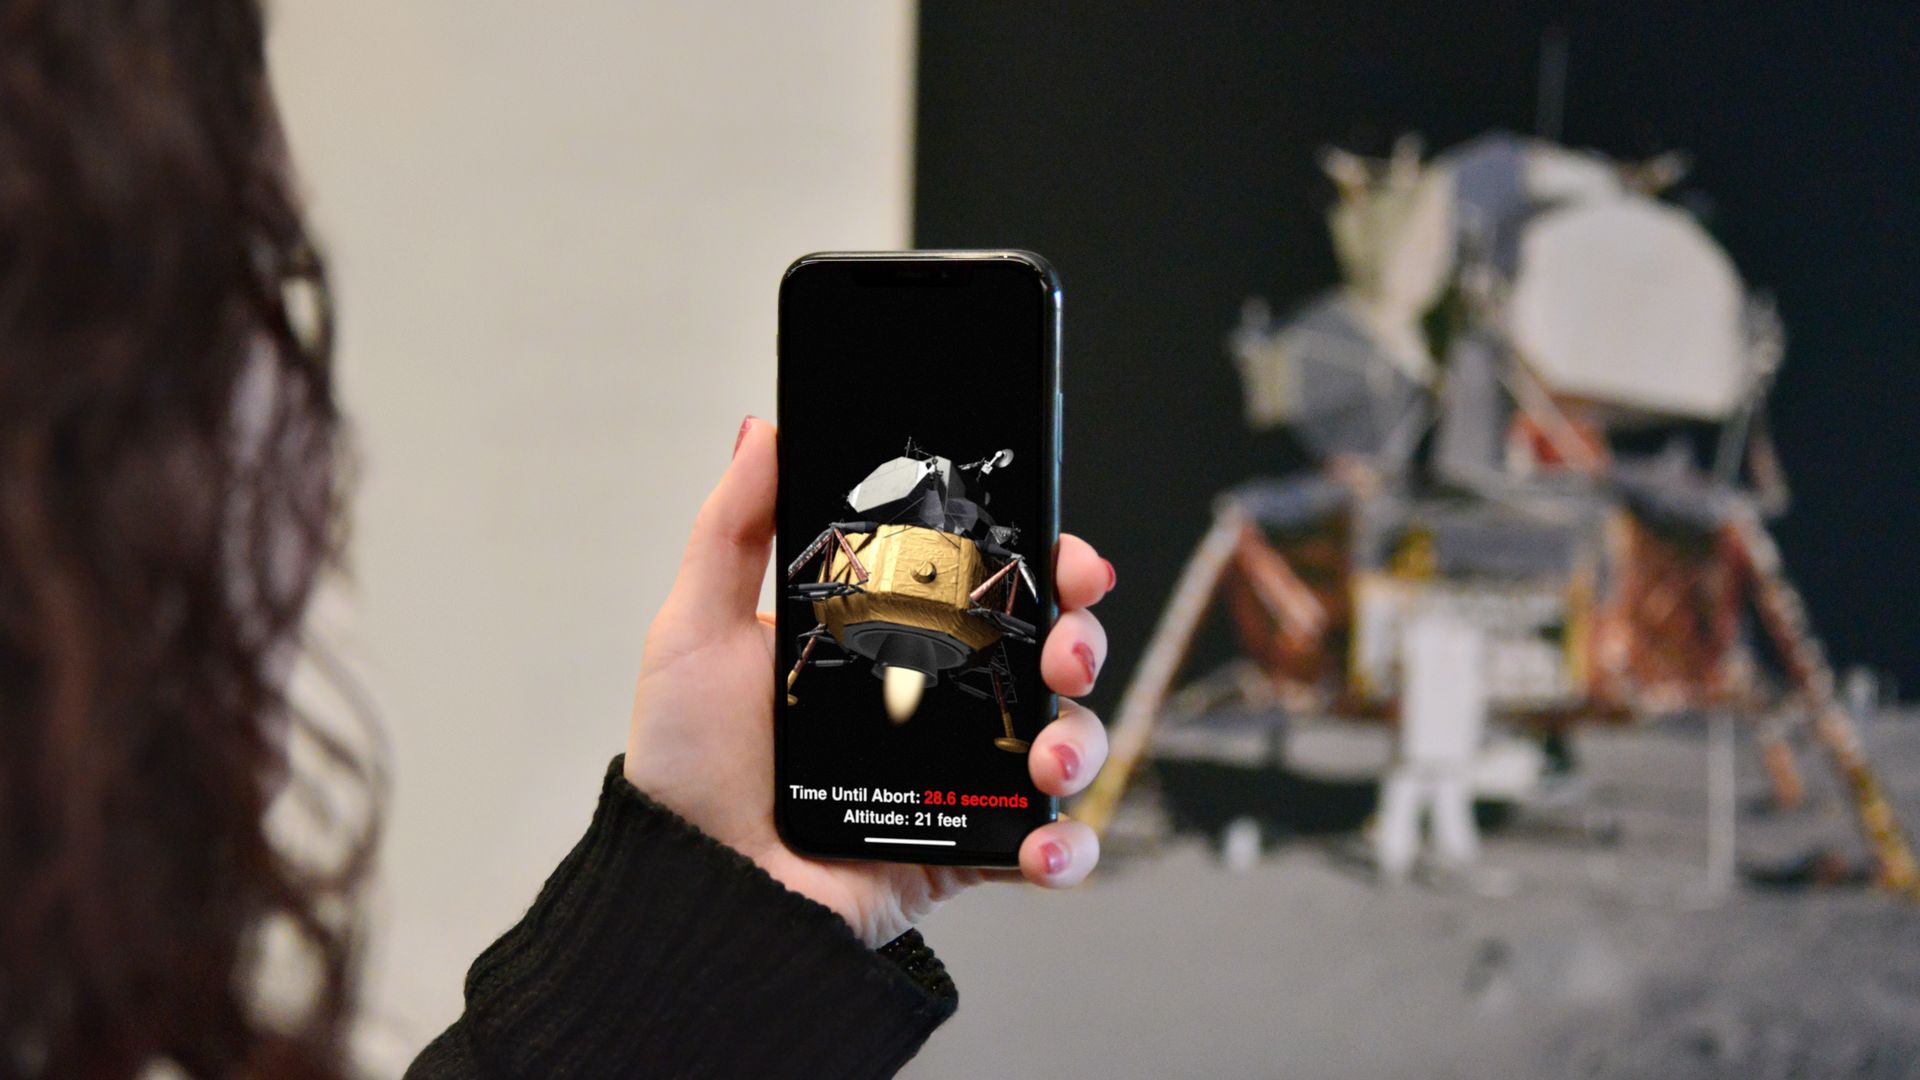 An update to Apple's ARKit can turn posters and other signs into interactive AR experiences.